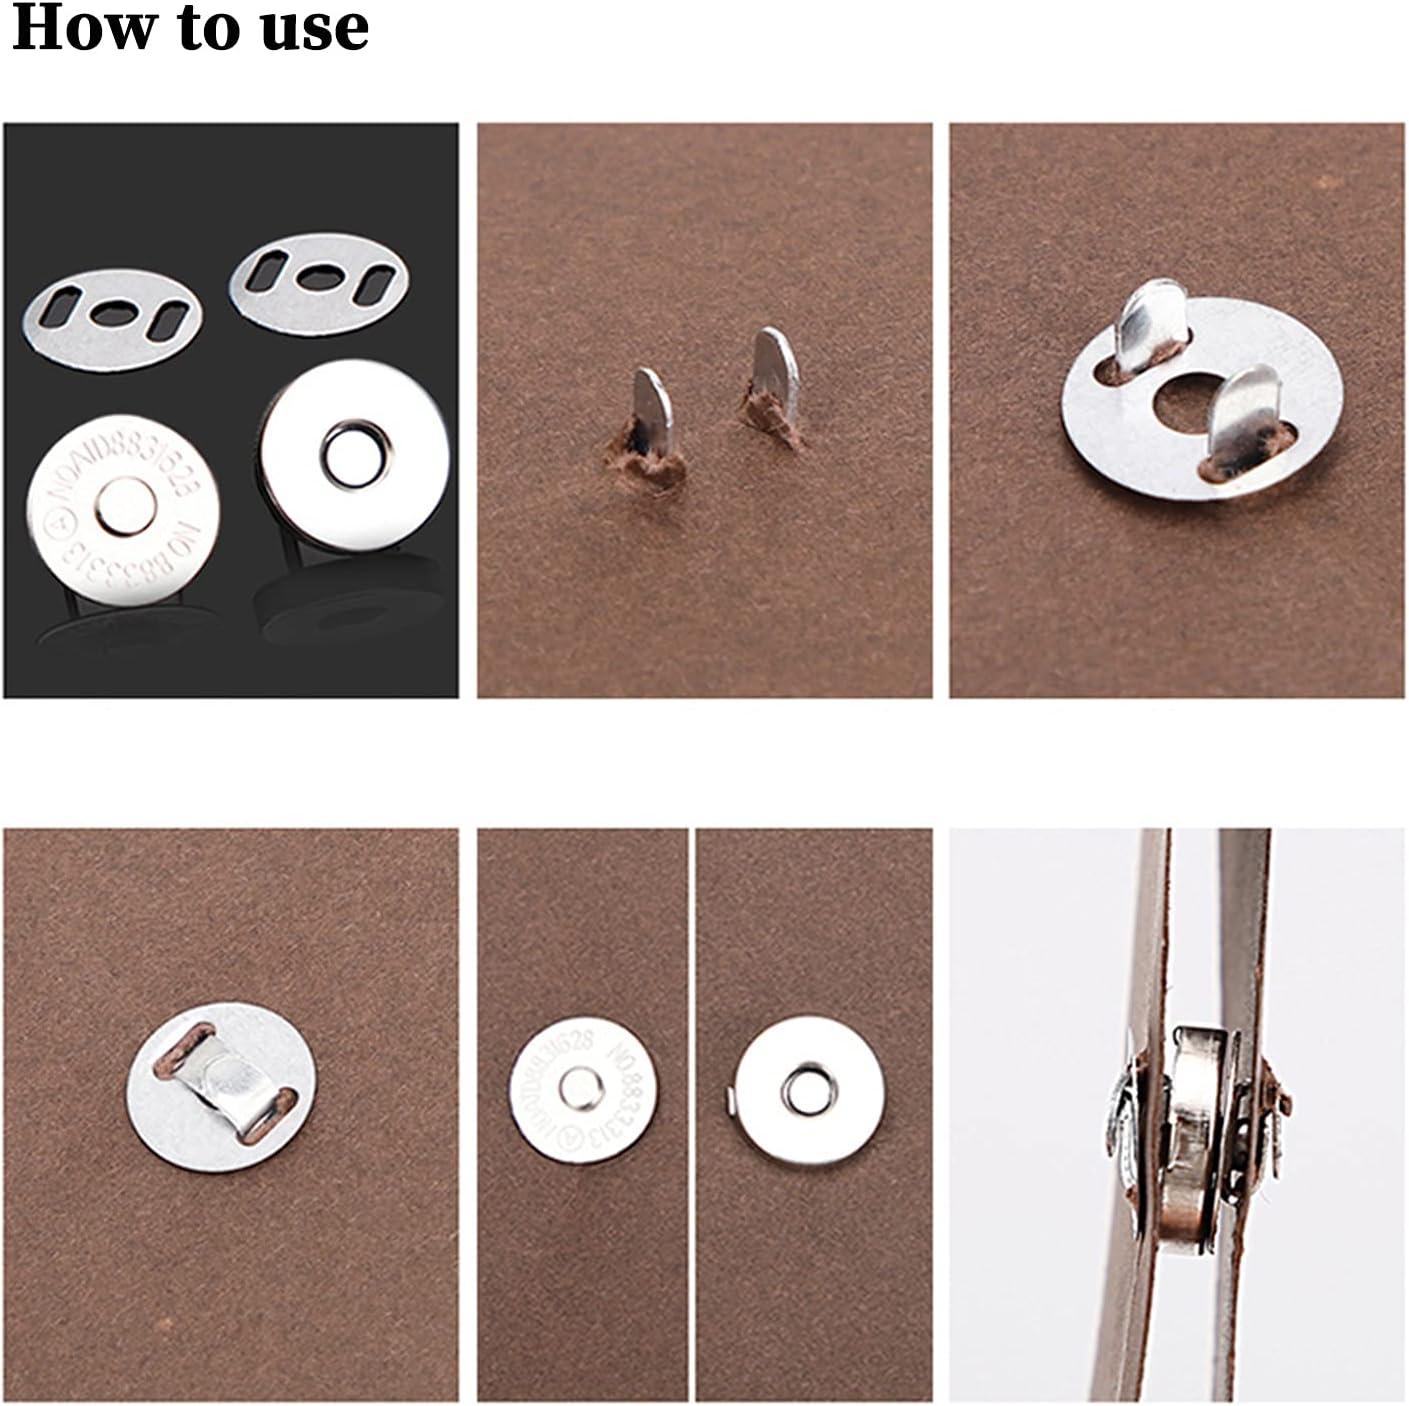 Sbest 20 Sets 14mm Coppery Strong Magnetic Button Clasps,Round Magnetic Snaps Bag Button Clasps Closure Purse Handbag with Washer Nickel DIY Craft